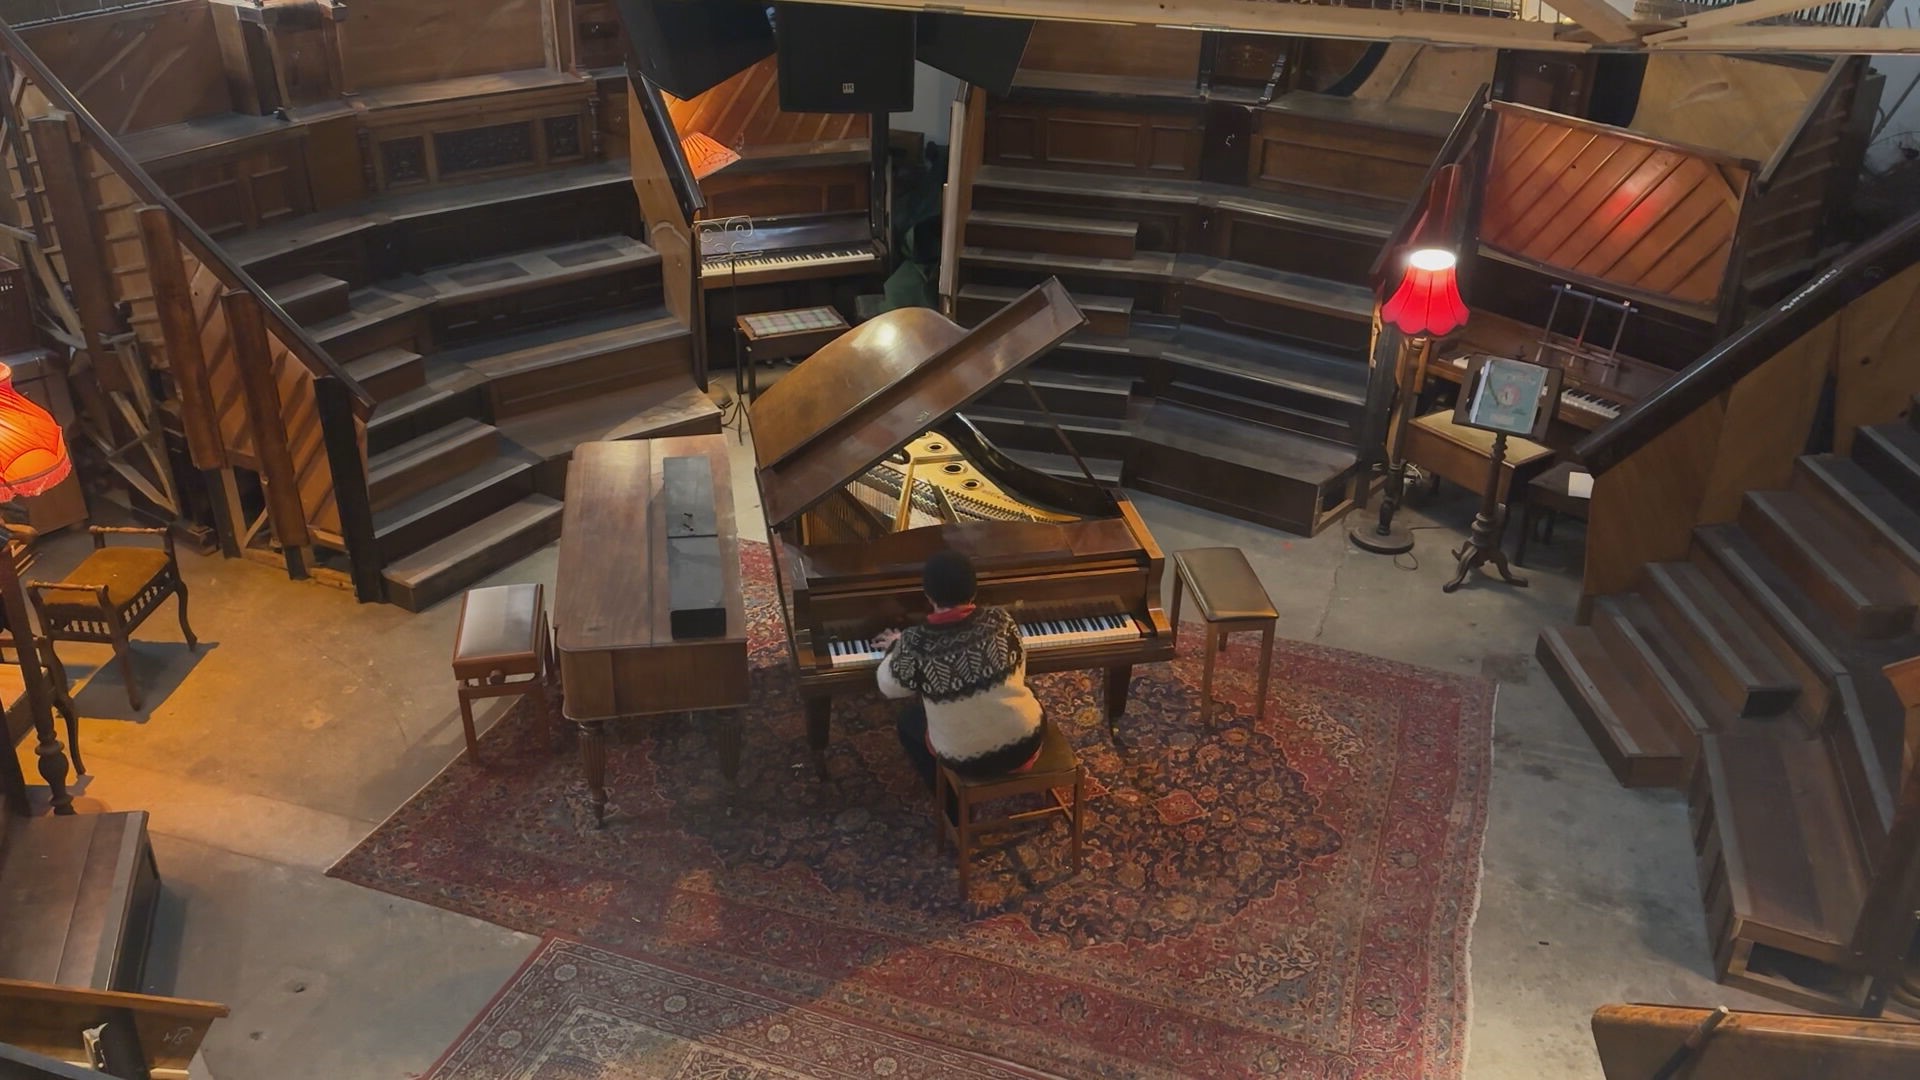 The Pianodrome was built in 2018.